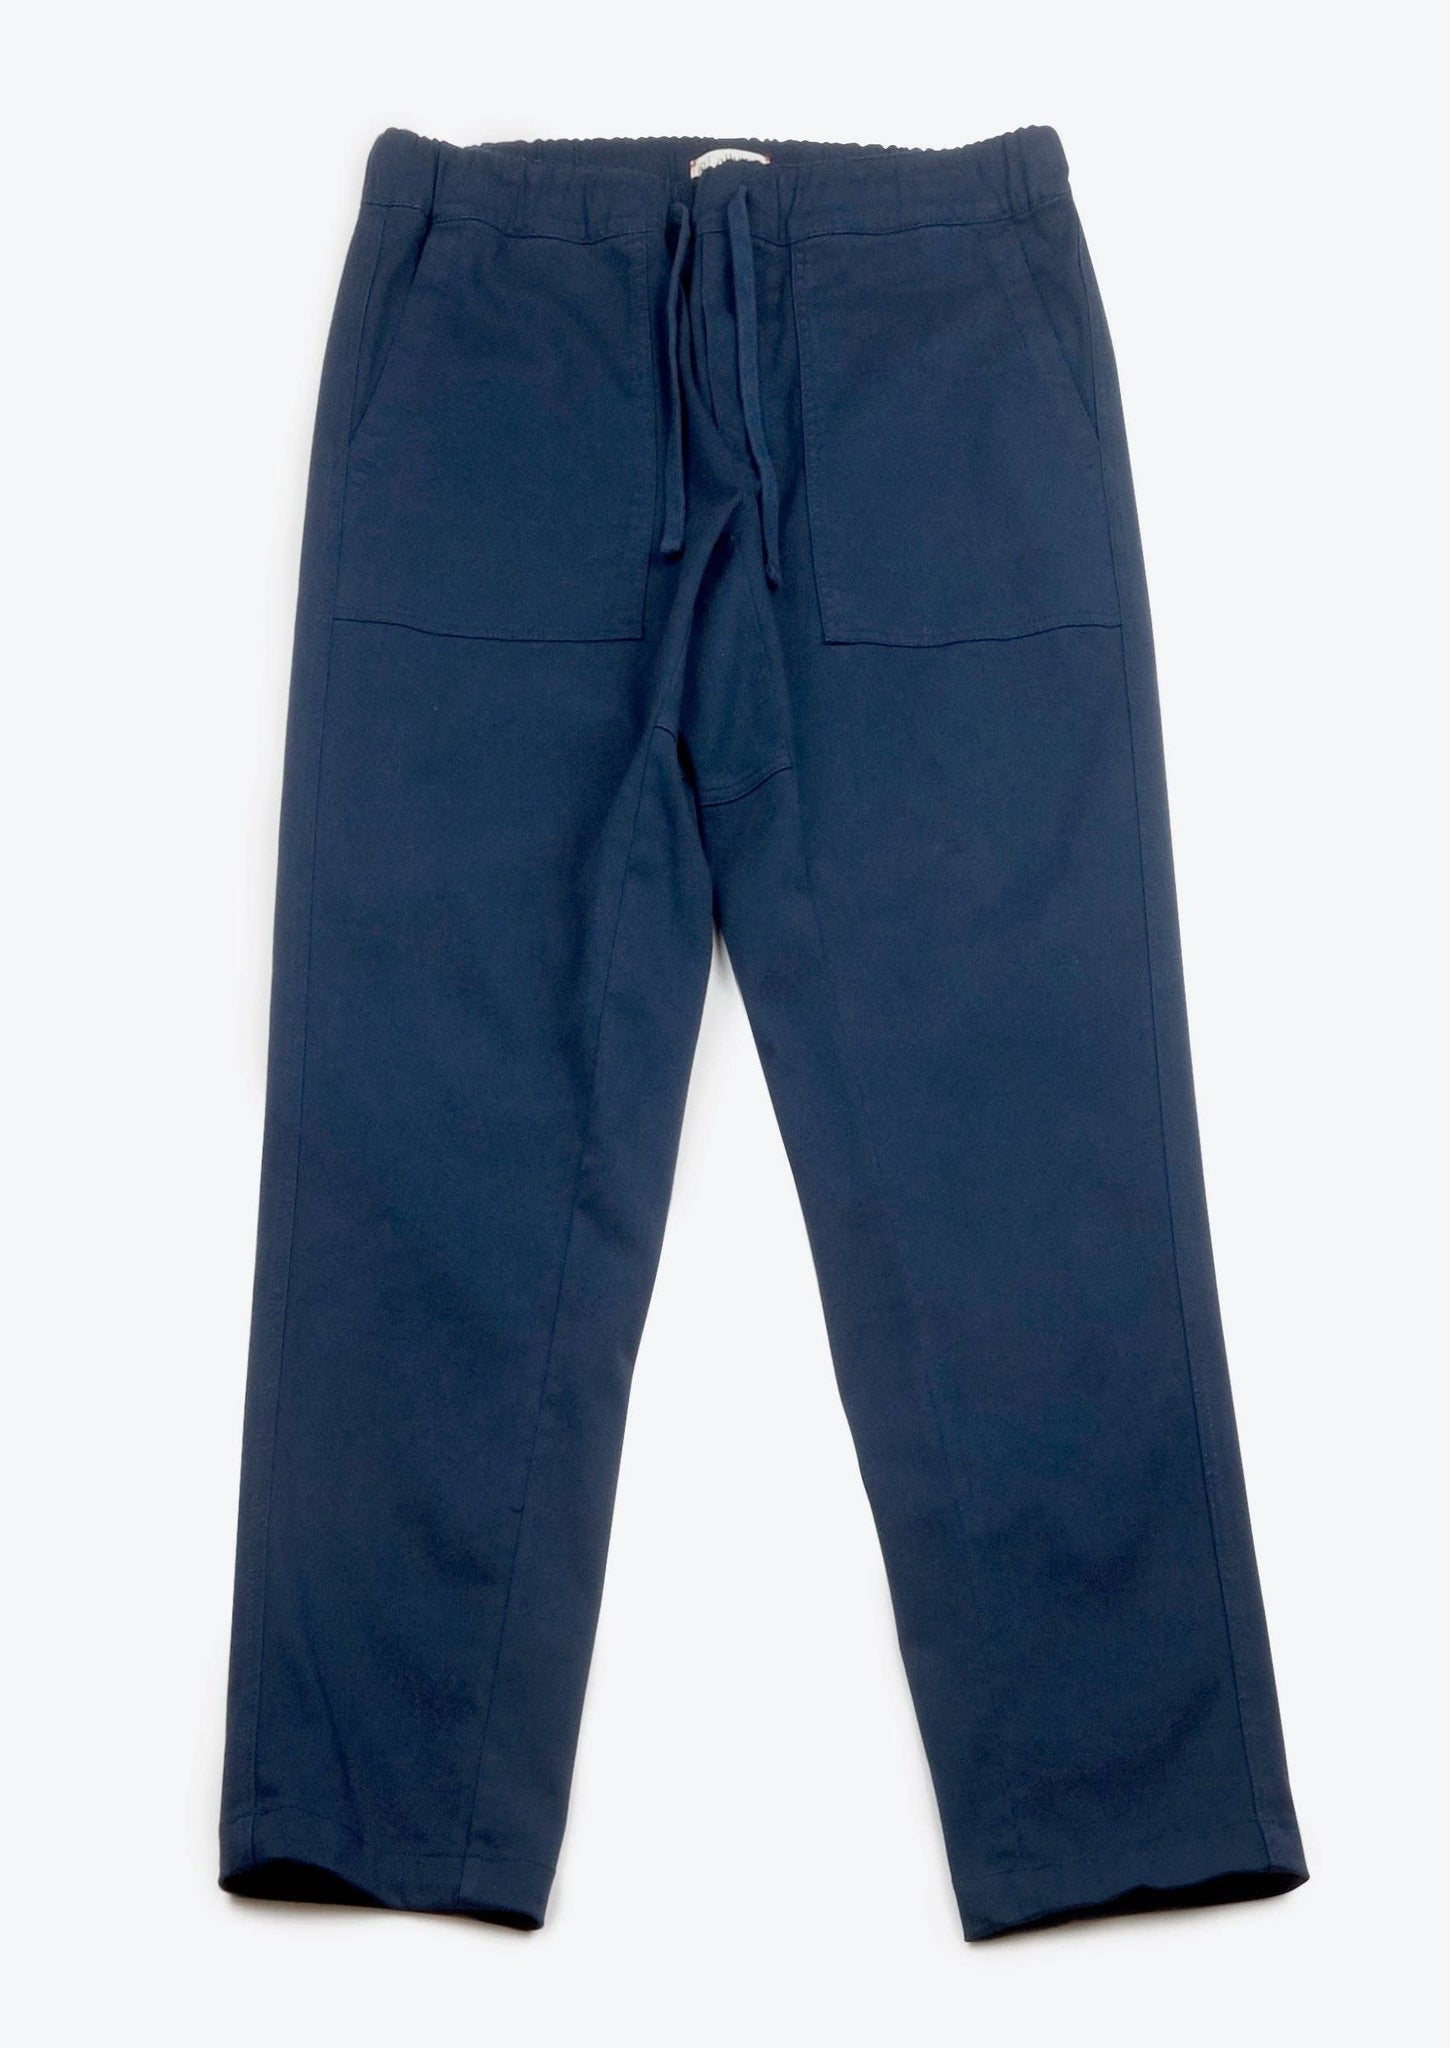 FOREST WORKWEAR NAVY PANT